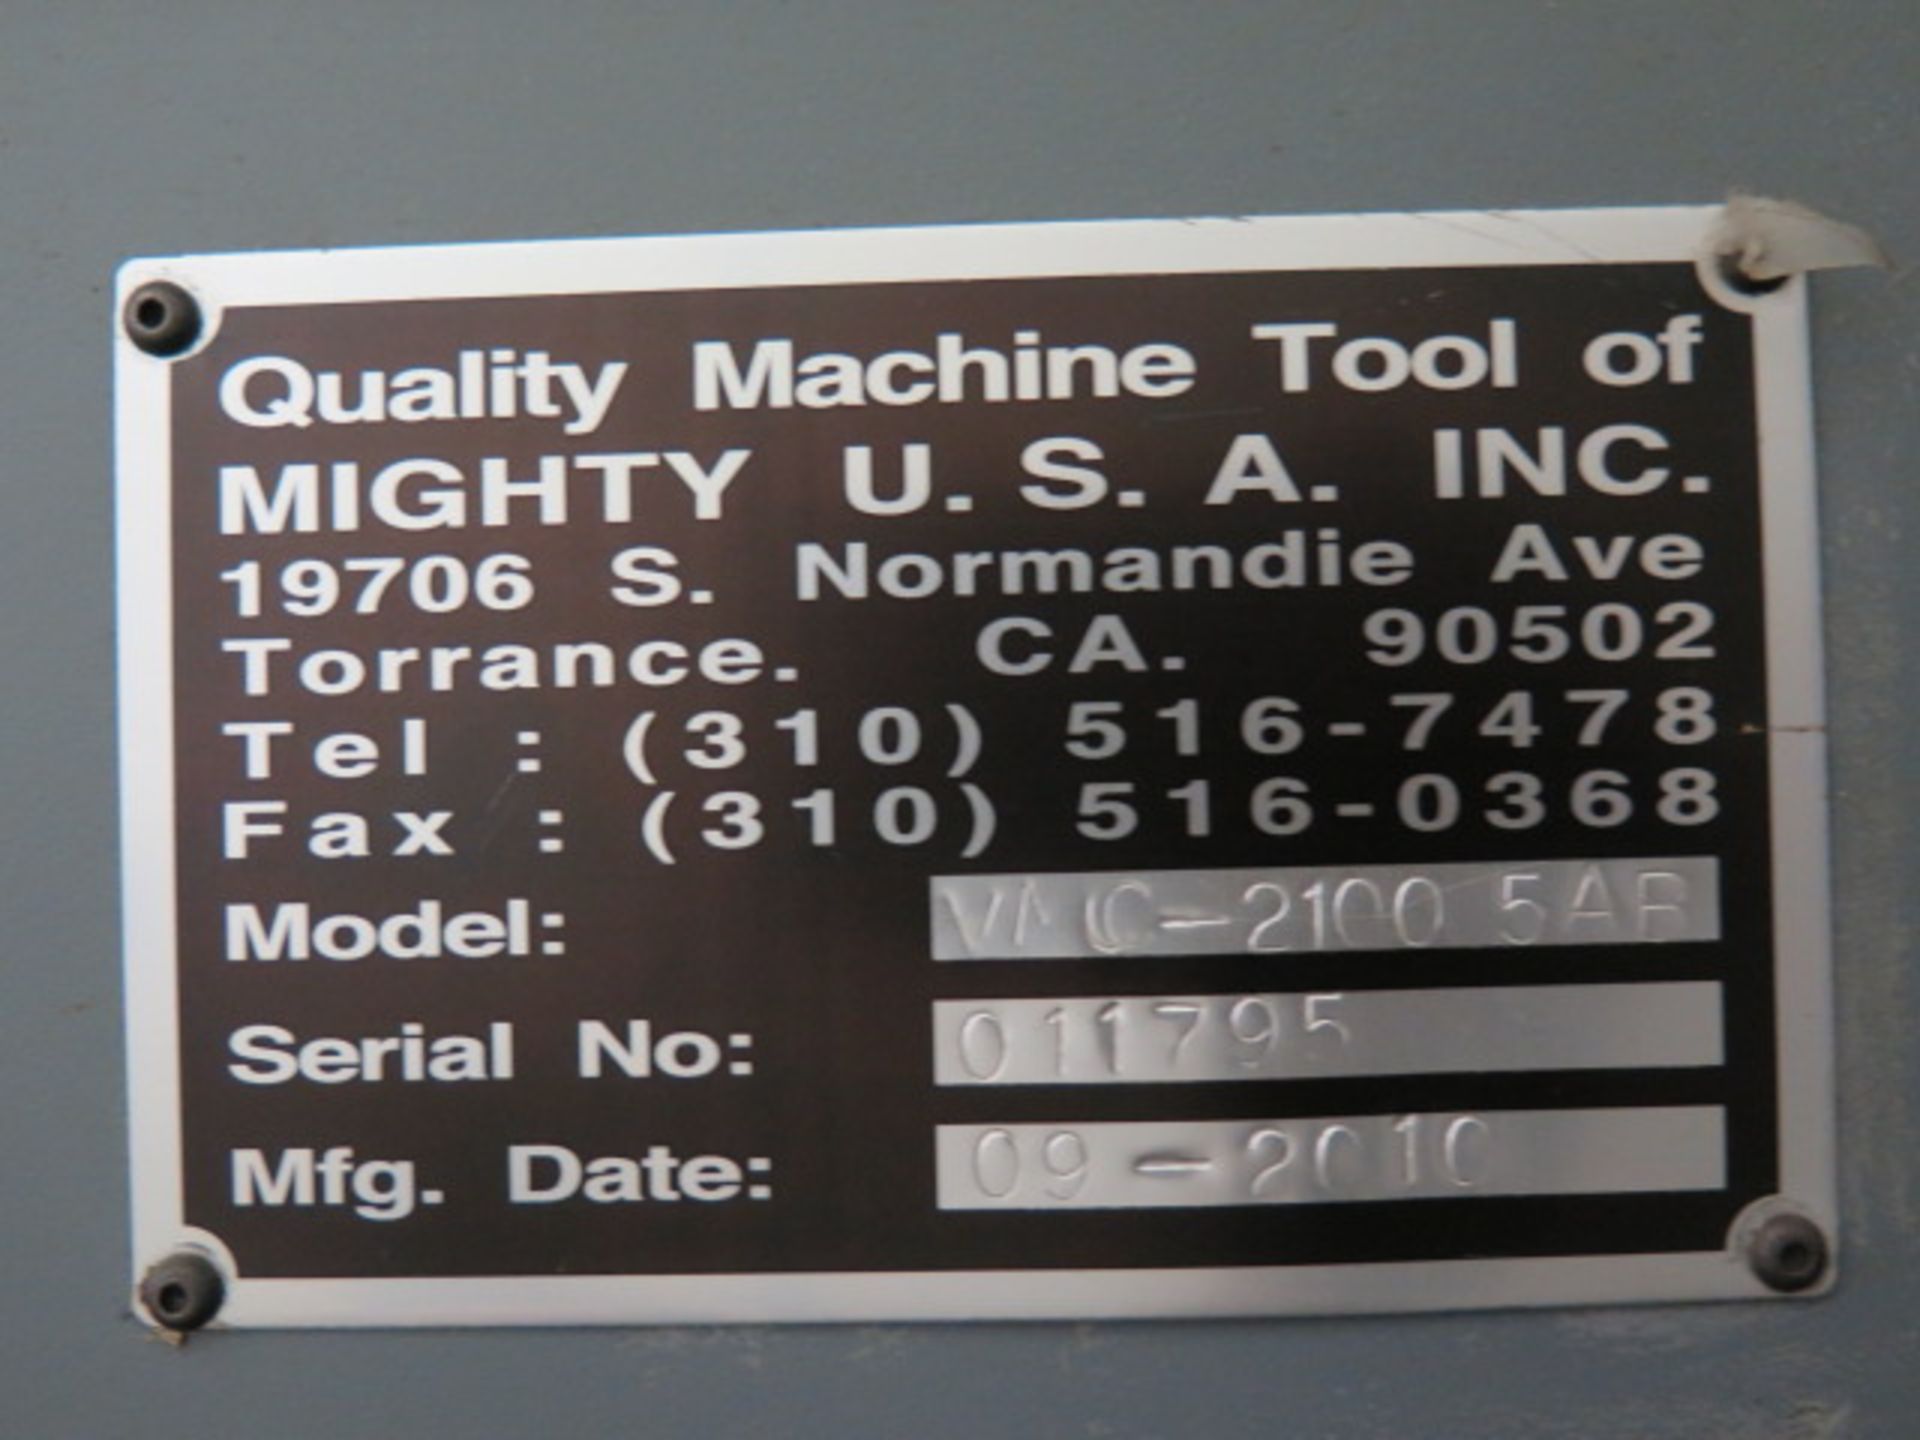 2010 Mighty Viper VMC-2100 5AB True 5-Axis CNC VMC, s/n 011795 w/ Fanuc 30i MODEL A, SOLD AS IS - Image 26 of 26